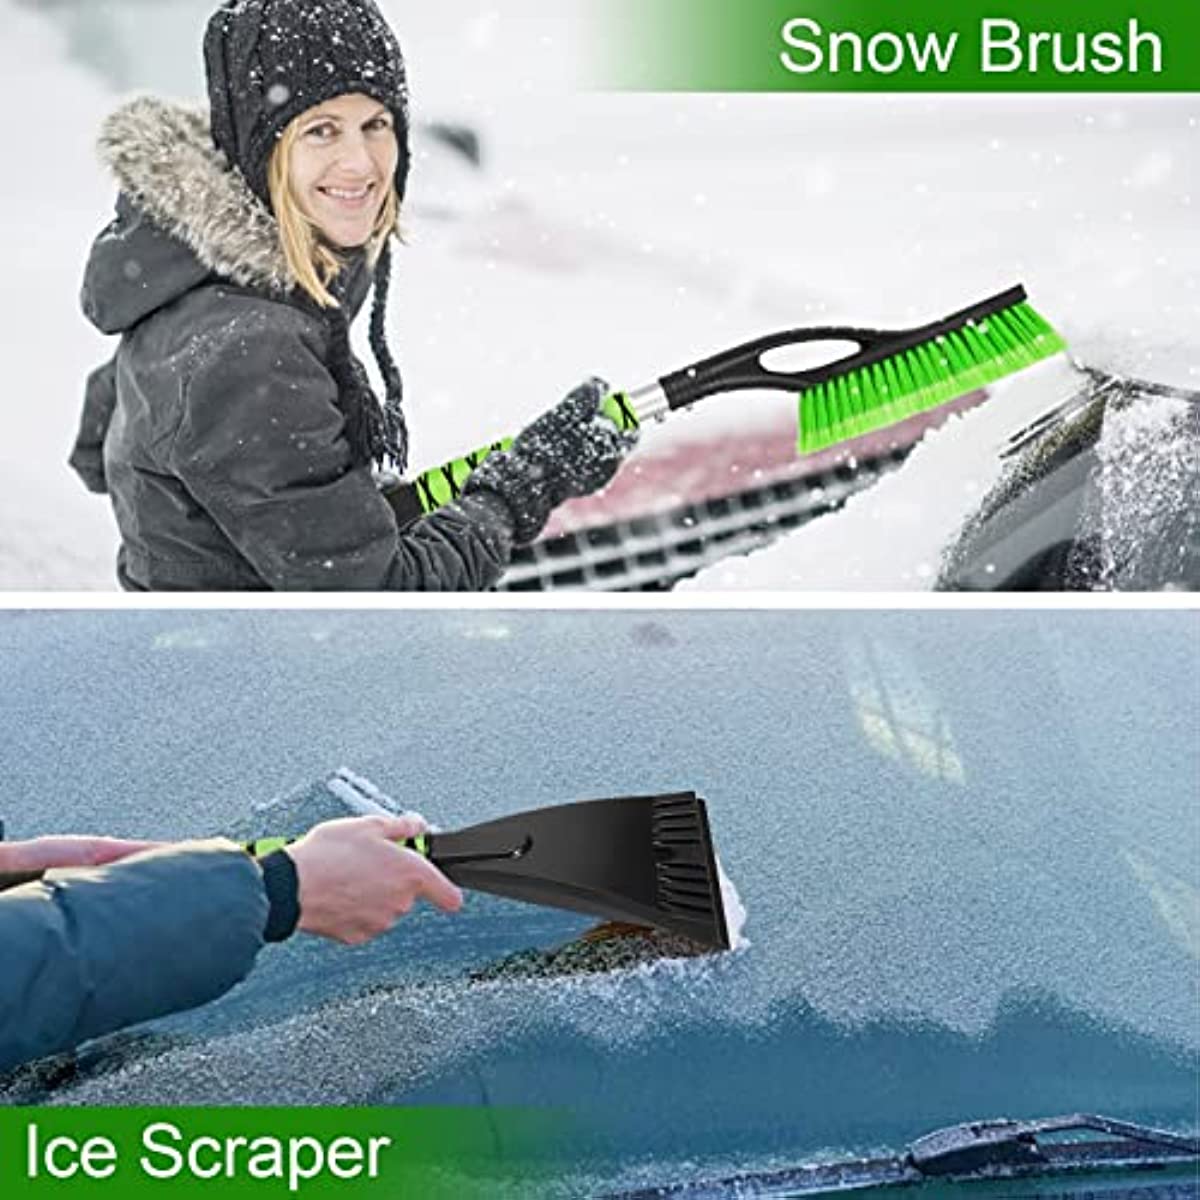 Snow Brush with Ice Scraper Detachable Snow Removal Tool for Cars Trucks SUVs 27"